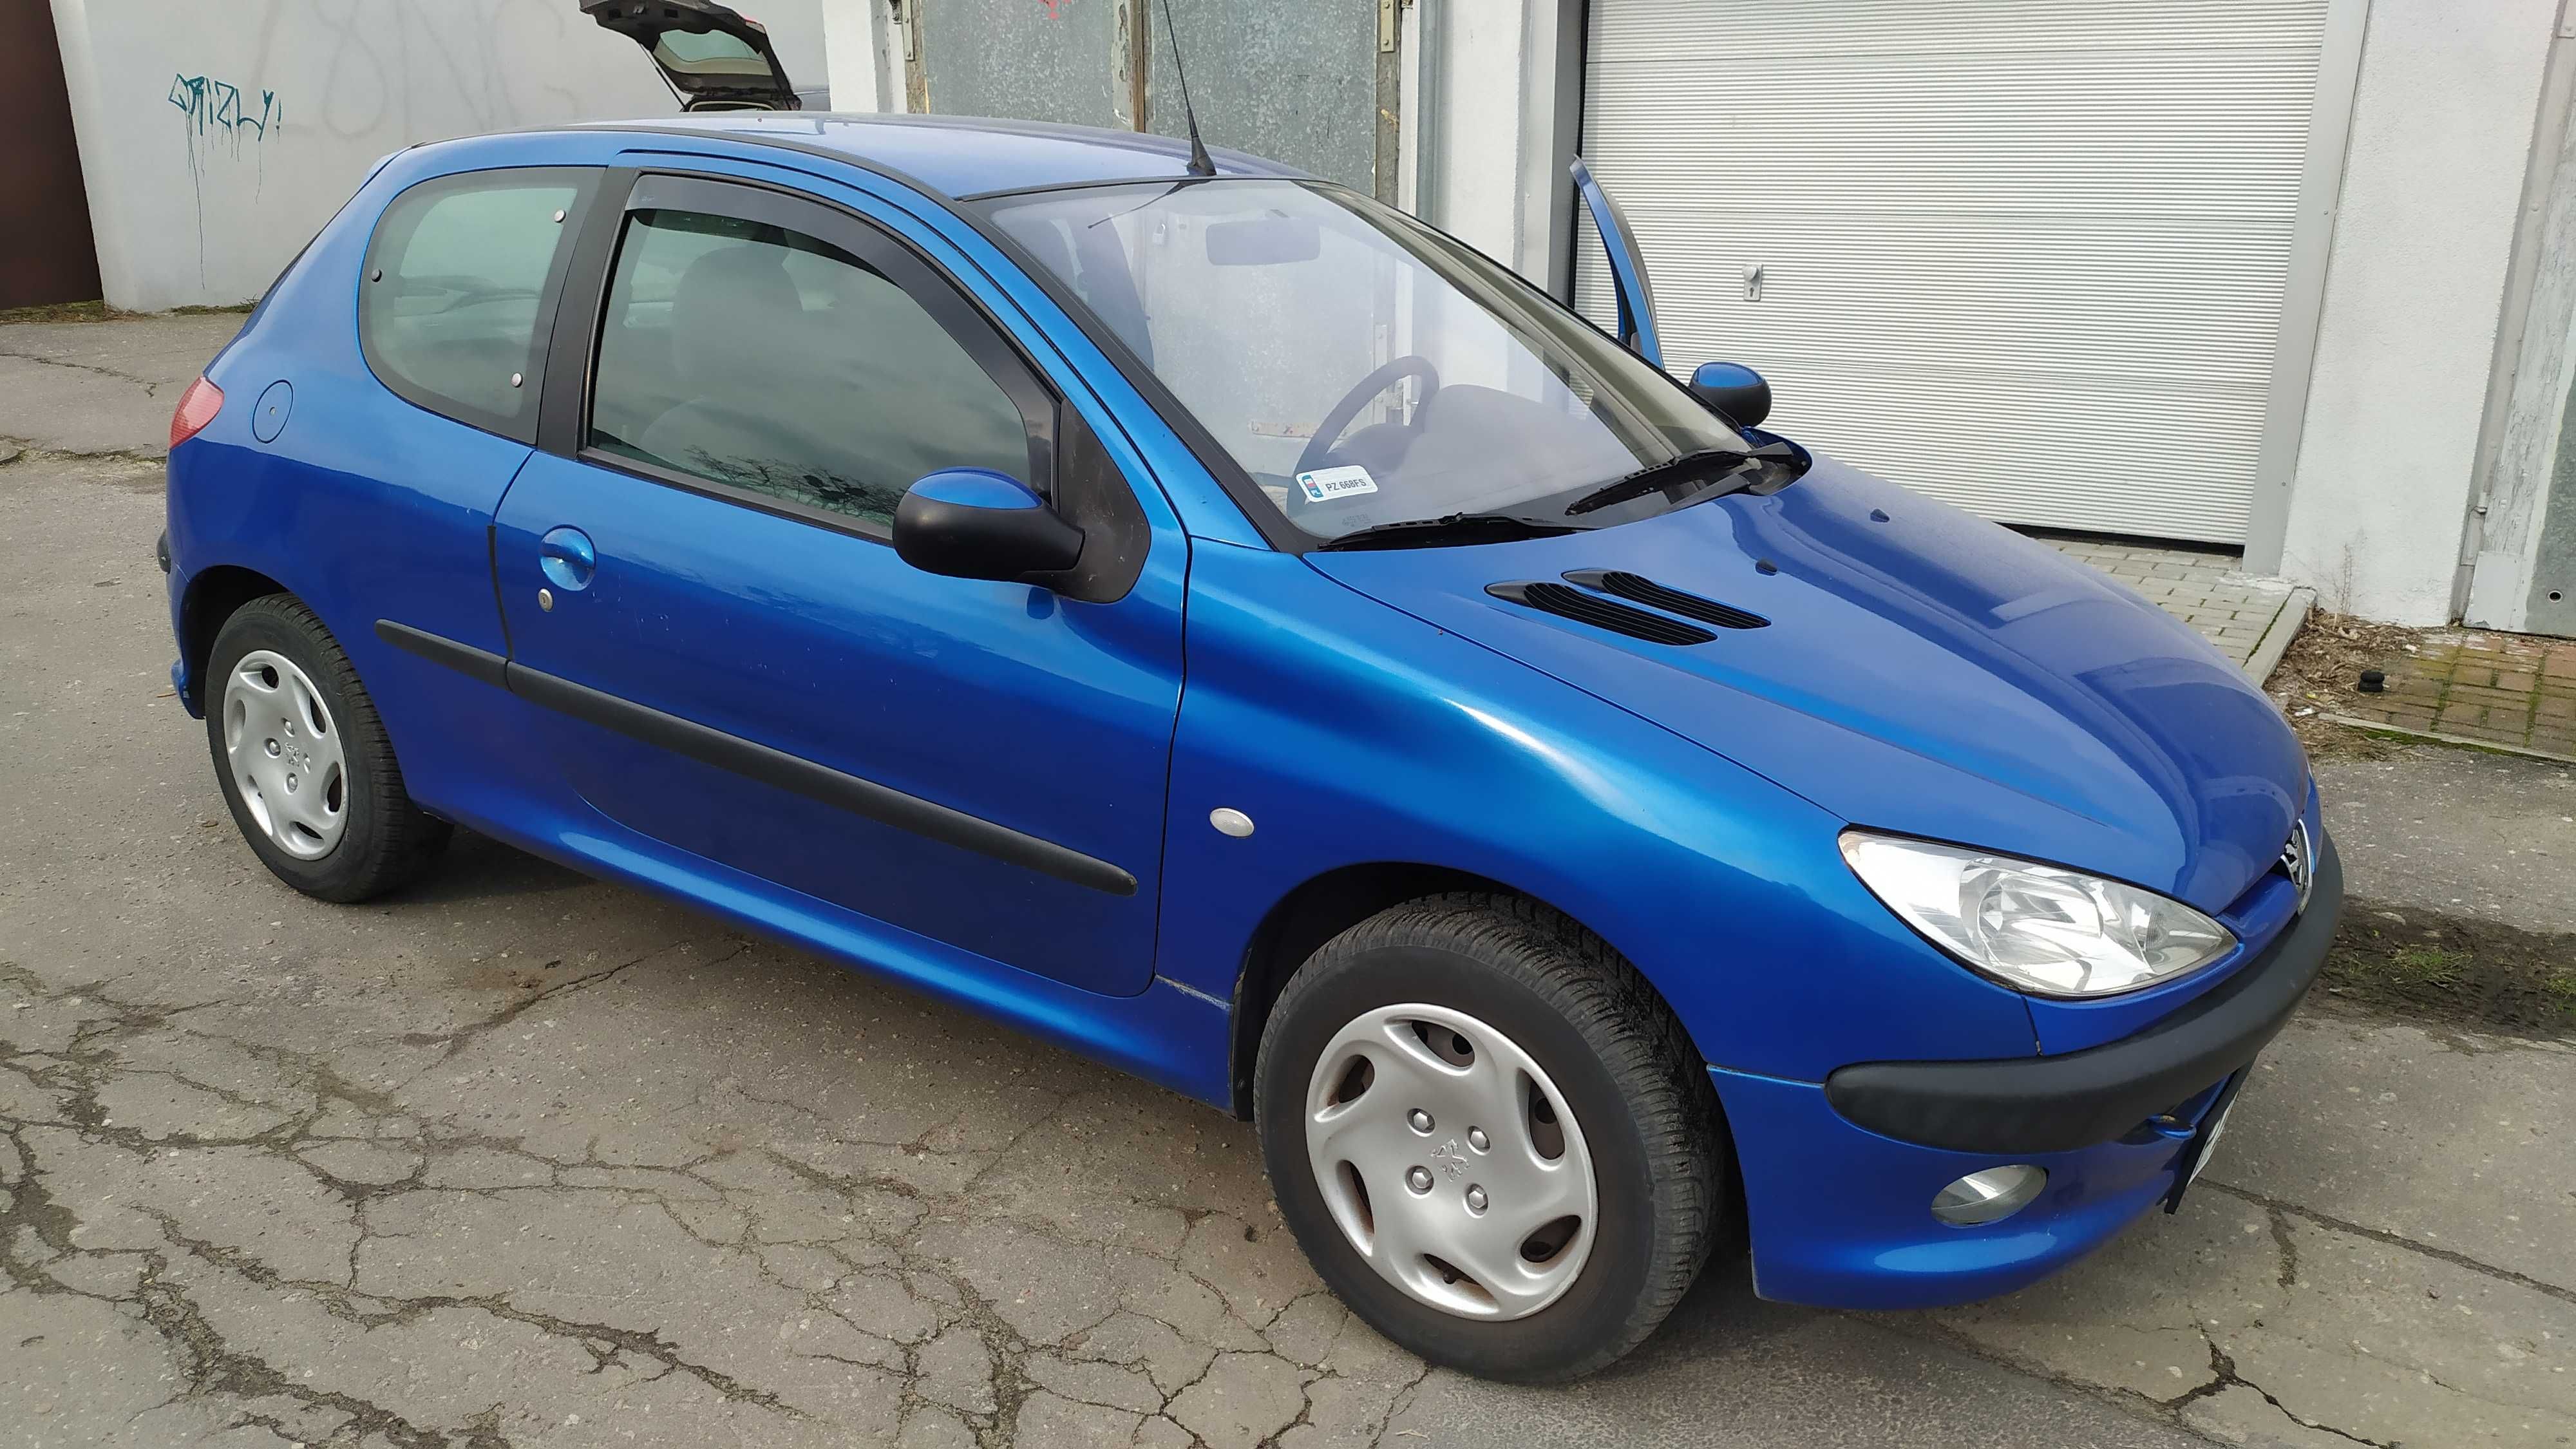 Peugeot 206 1.1 benzyna